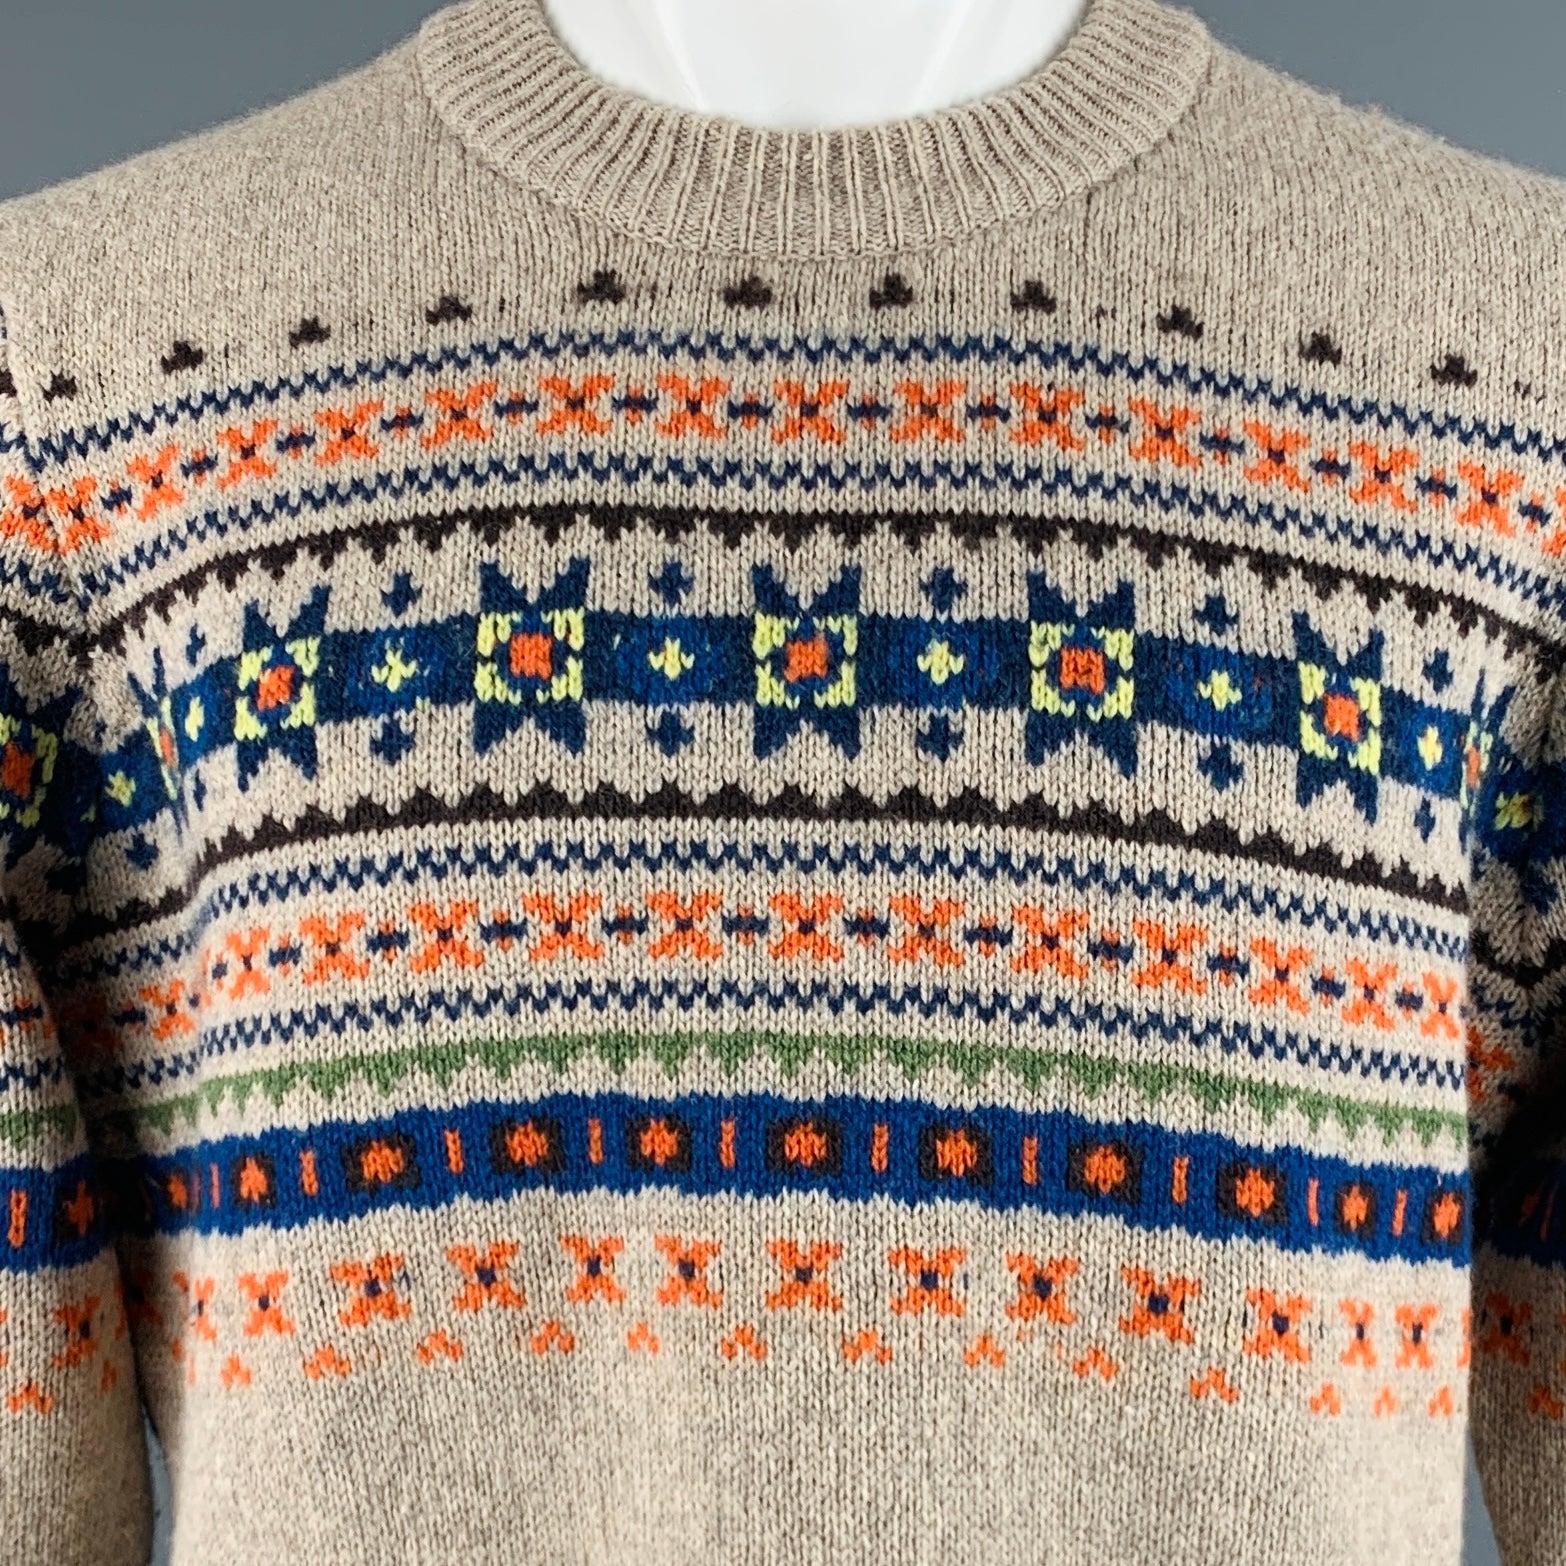 JOSEPH sweater
in a
grey wool knit featuring blue and orange Fair Isle pattern, blue contrast back, and
 crew neck.Excellent Pre-Owned Condition. 

Marked:   M 

Measurements: 
 
Shoulder: 18.5 inches Chest: 45 inches Sleeve: 27 inches Length: 27.5